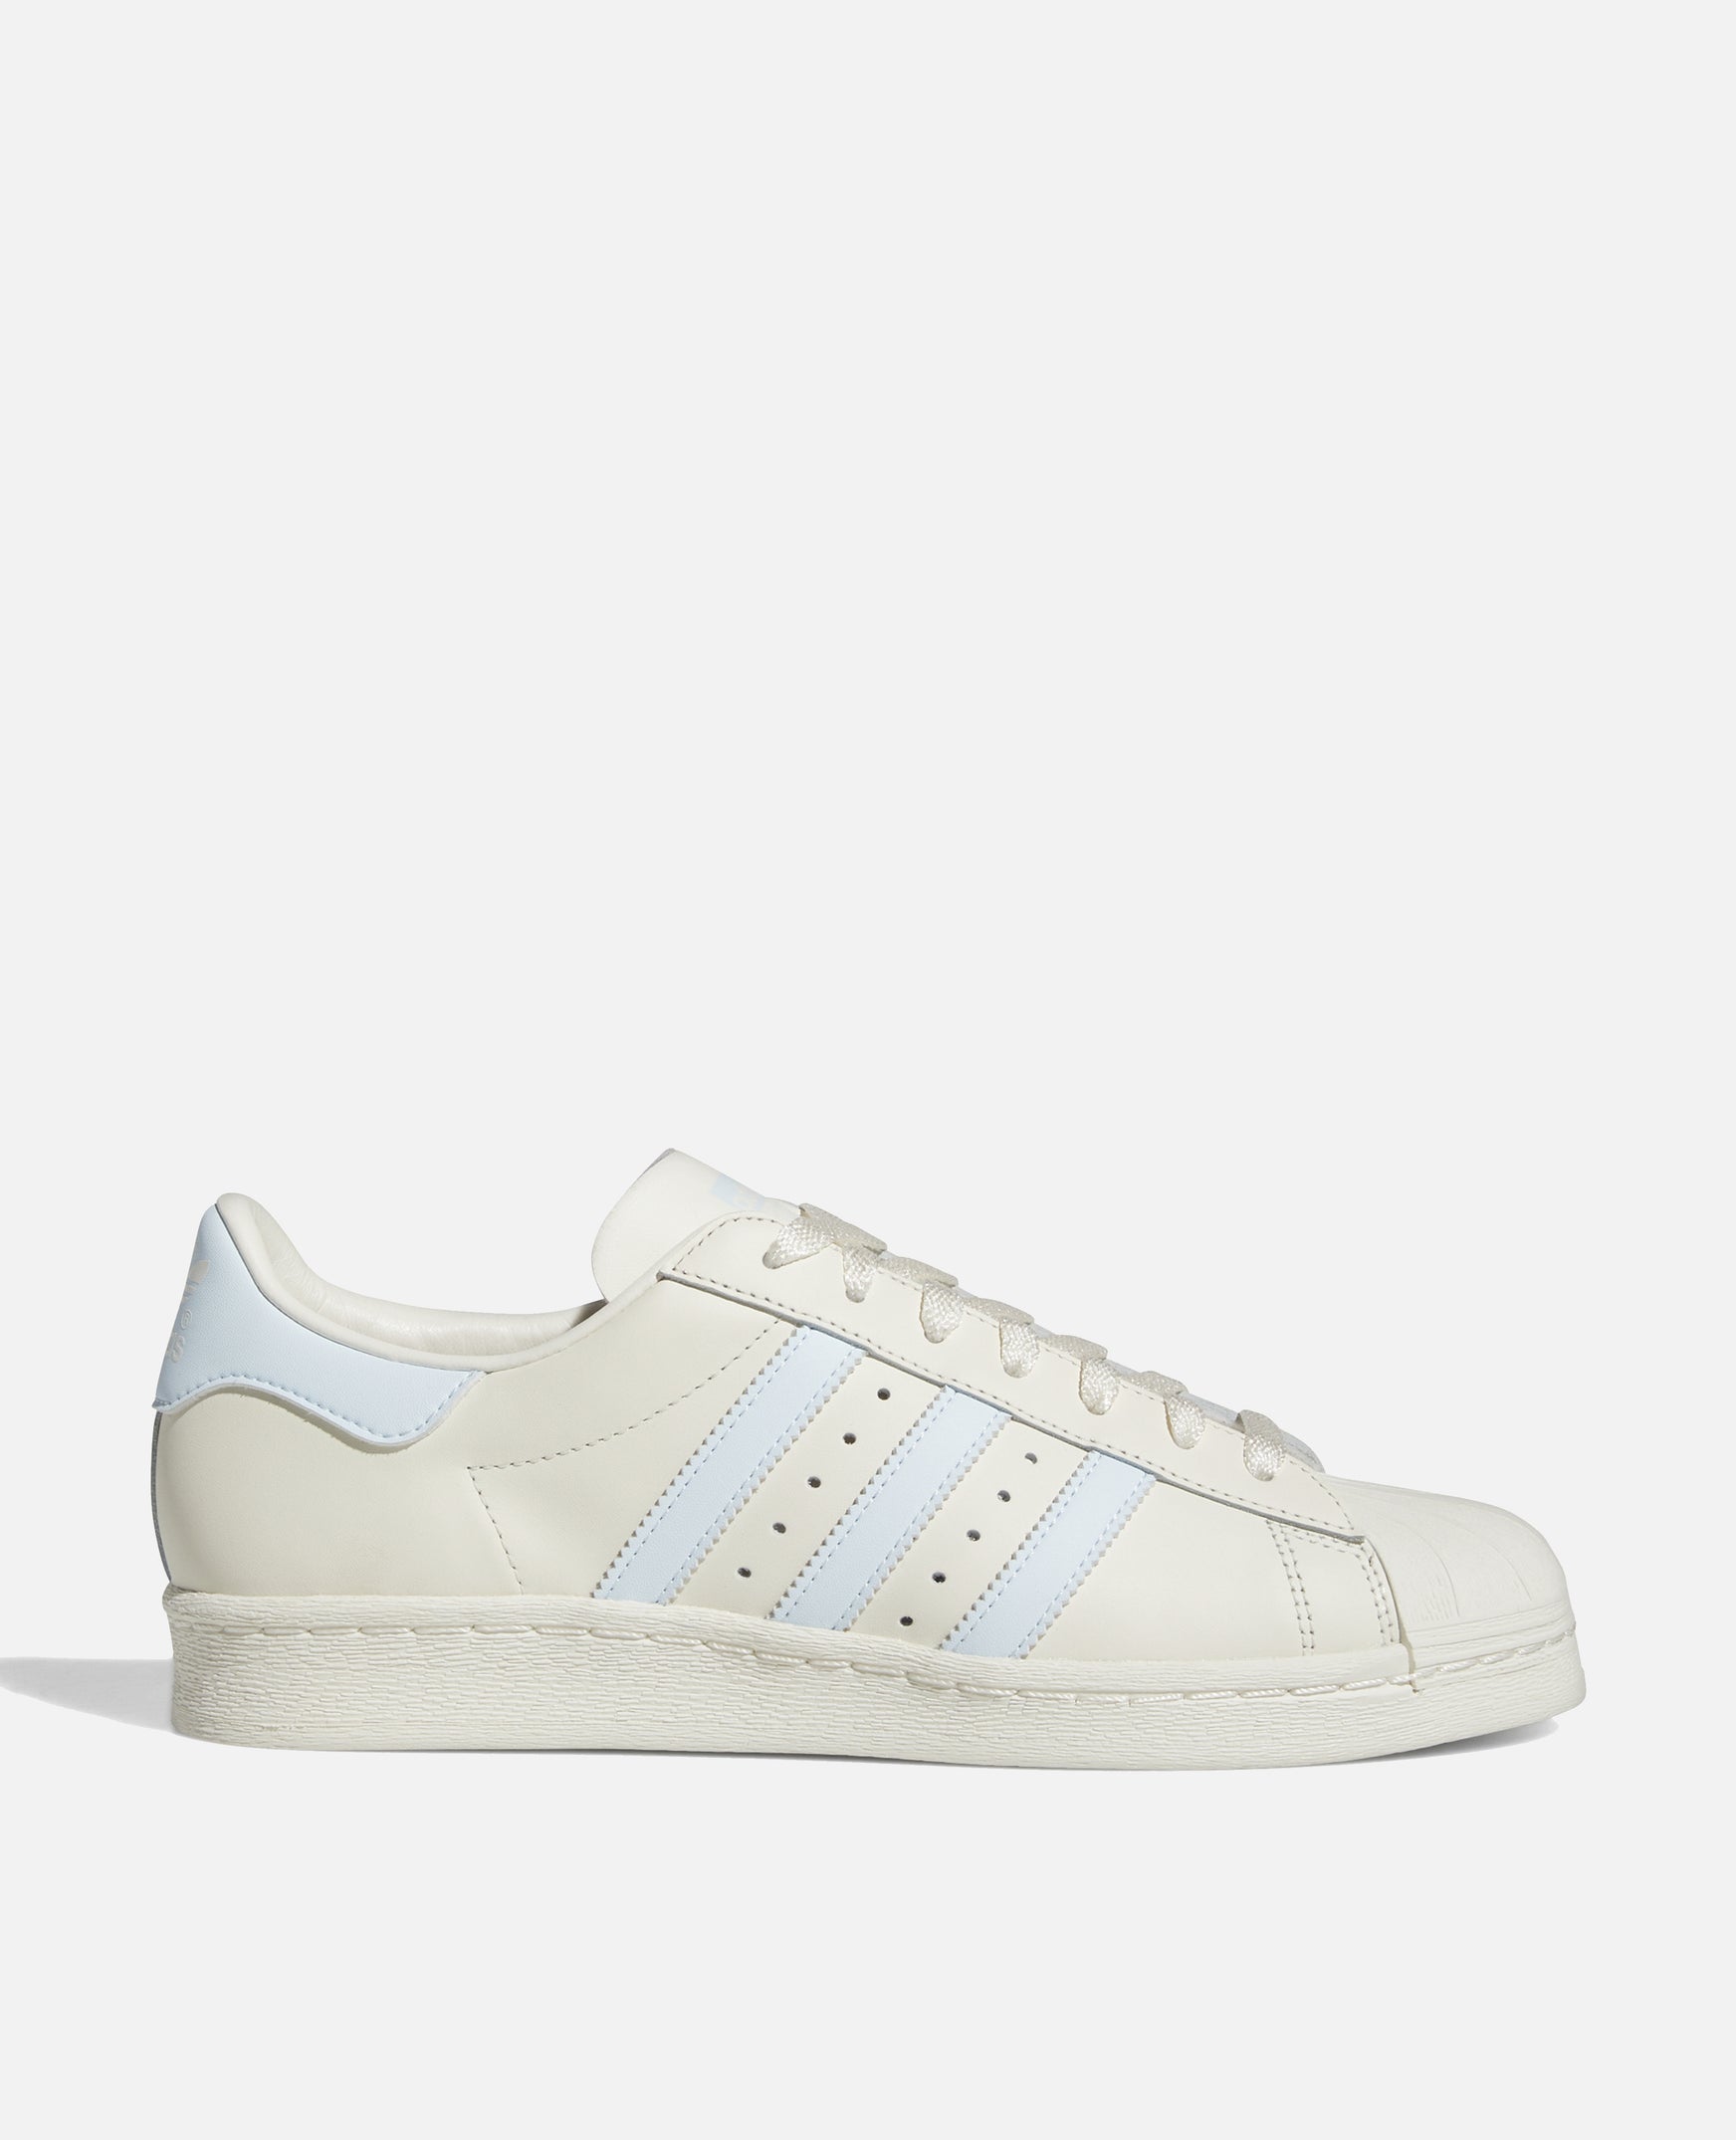 Adidas Superstar 82 (Cloud White/Sky Tint/Off White)